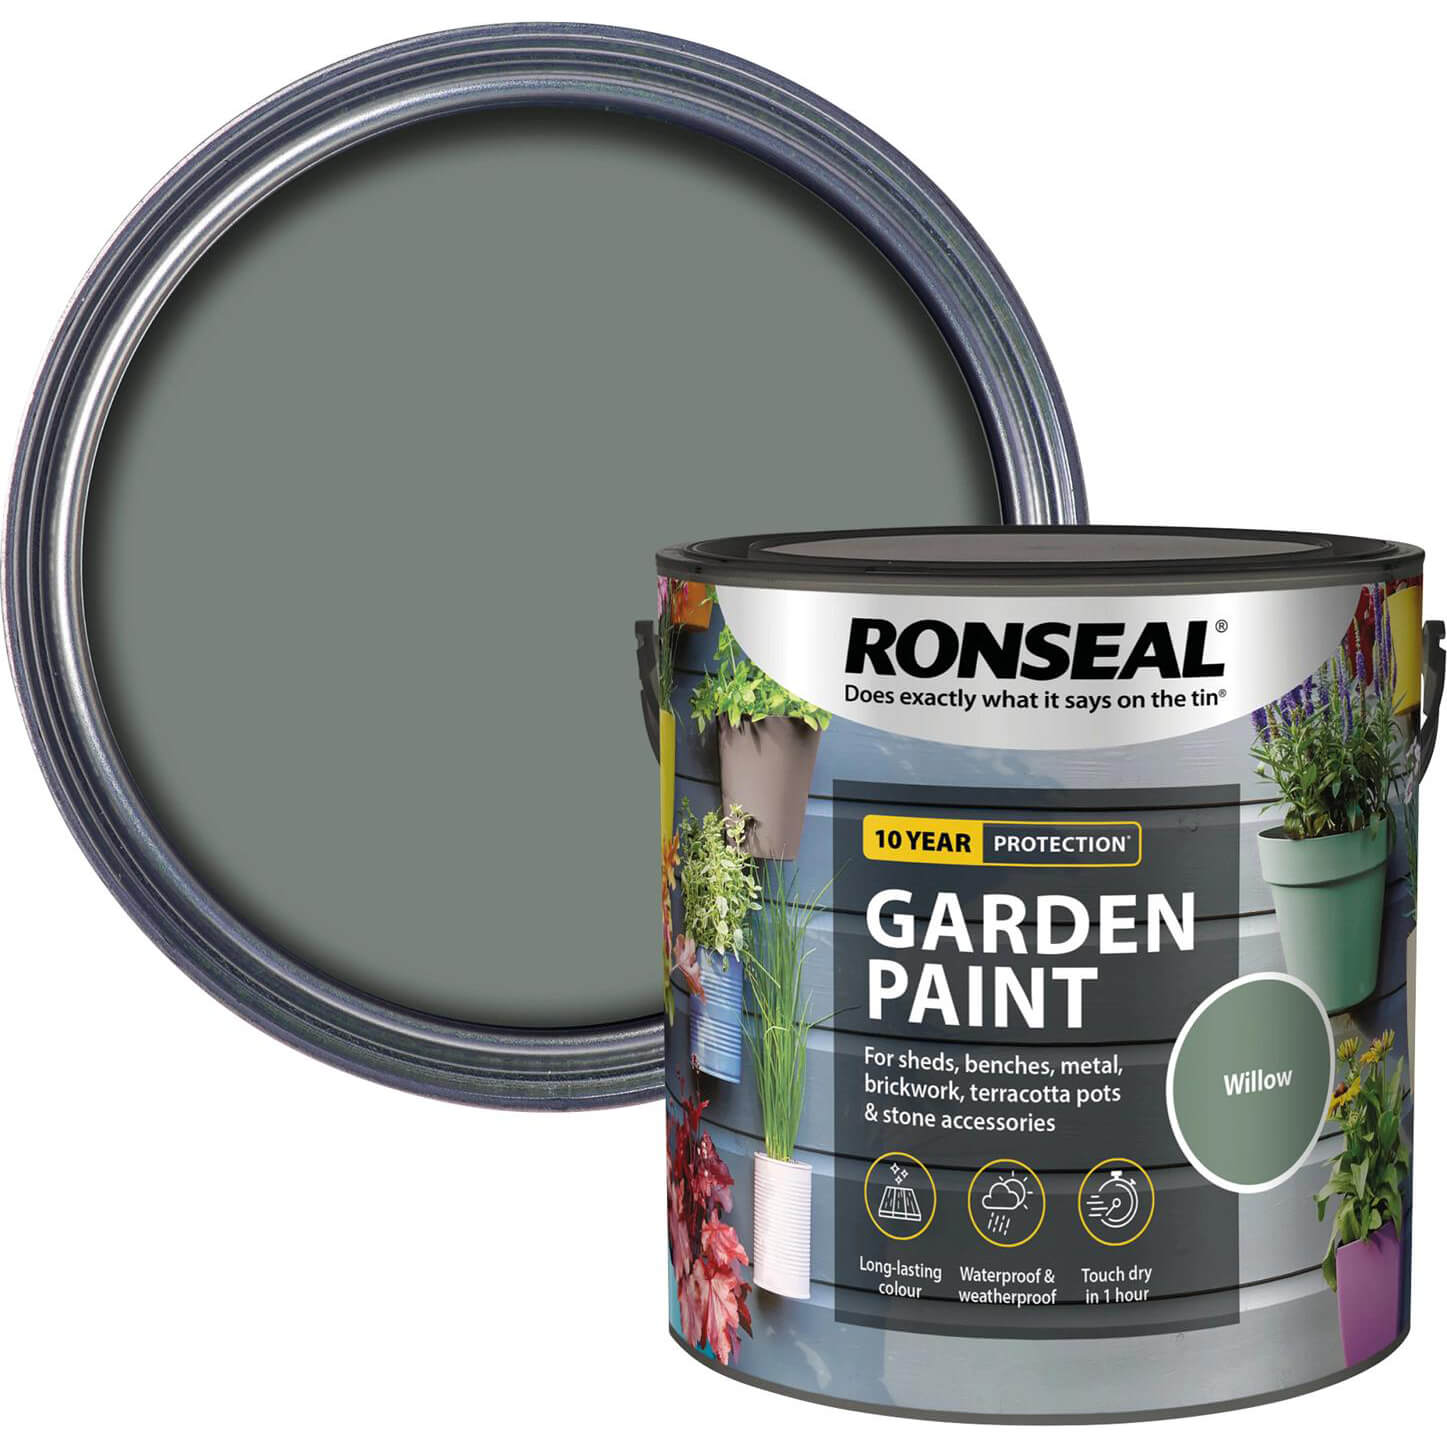 Image of Ronseal General Purpose Garden Paint Willow 2.5l